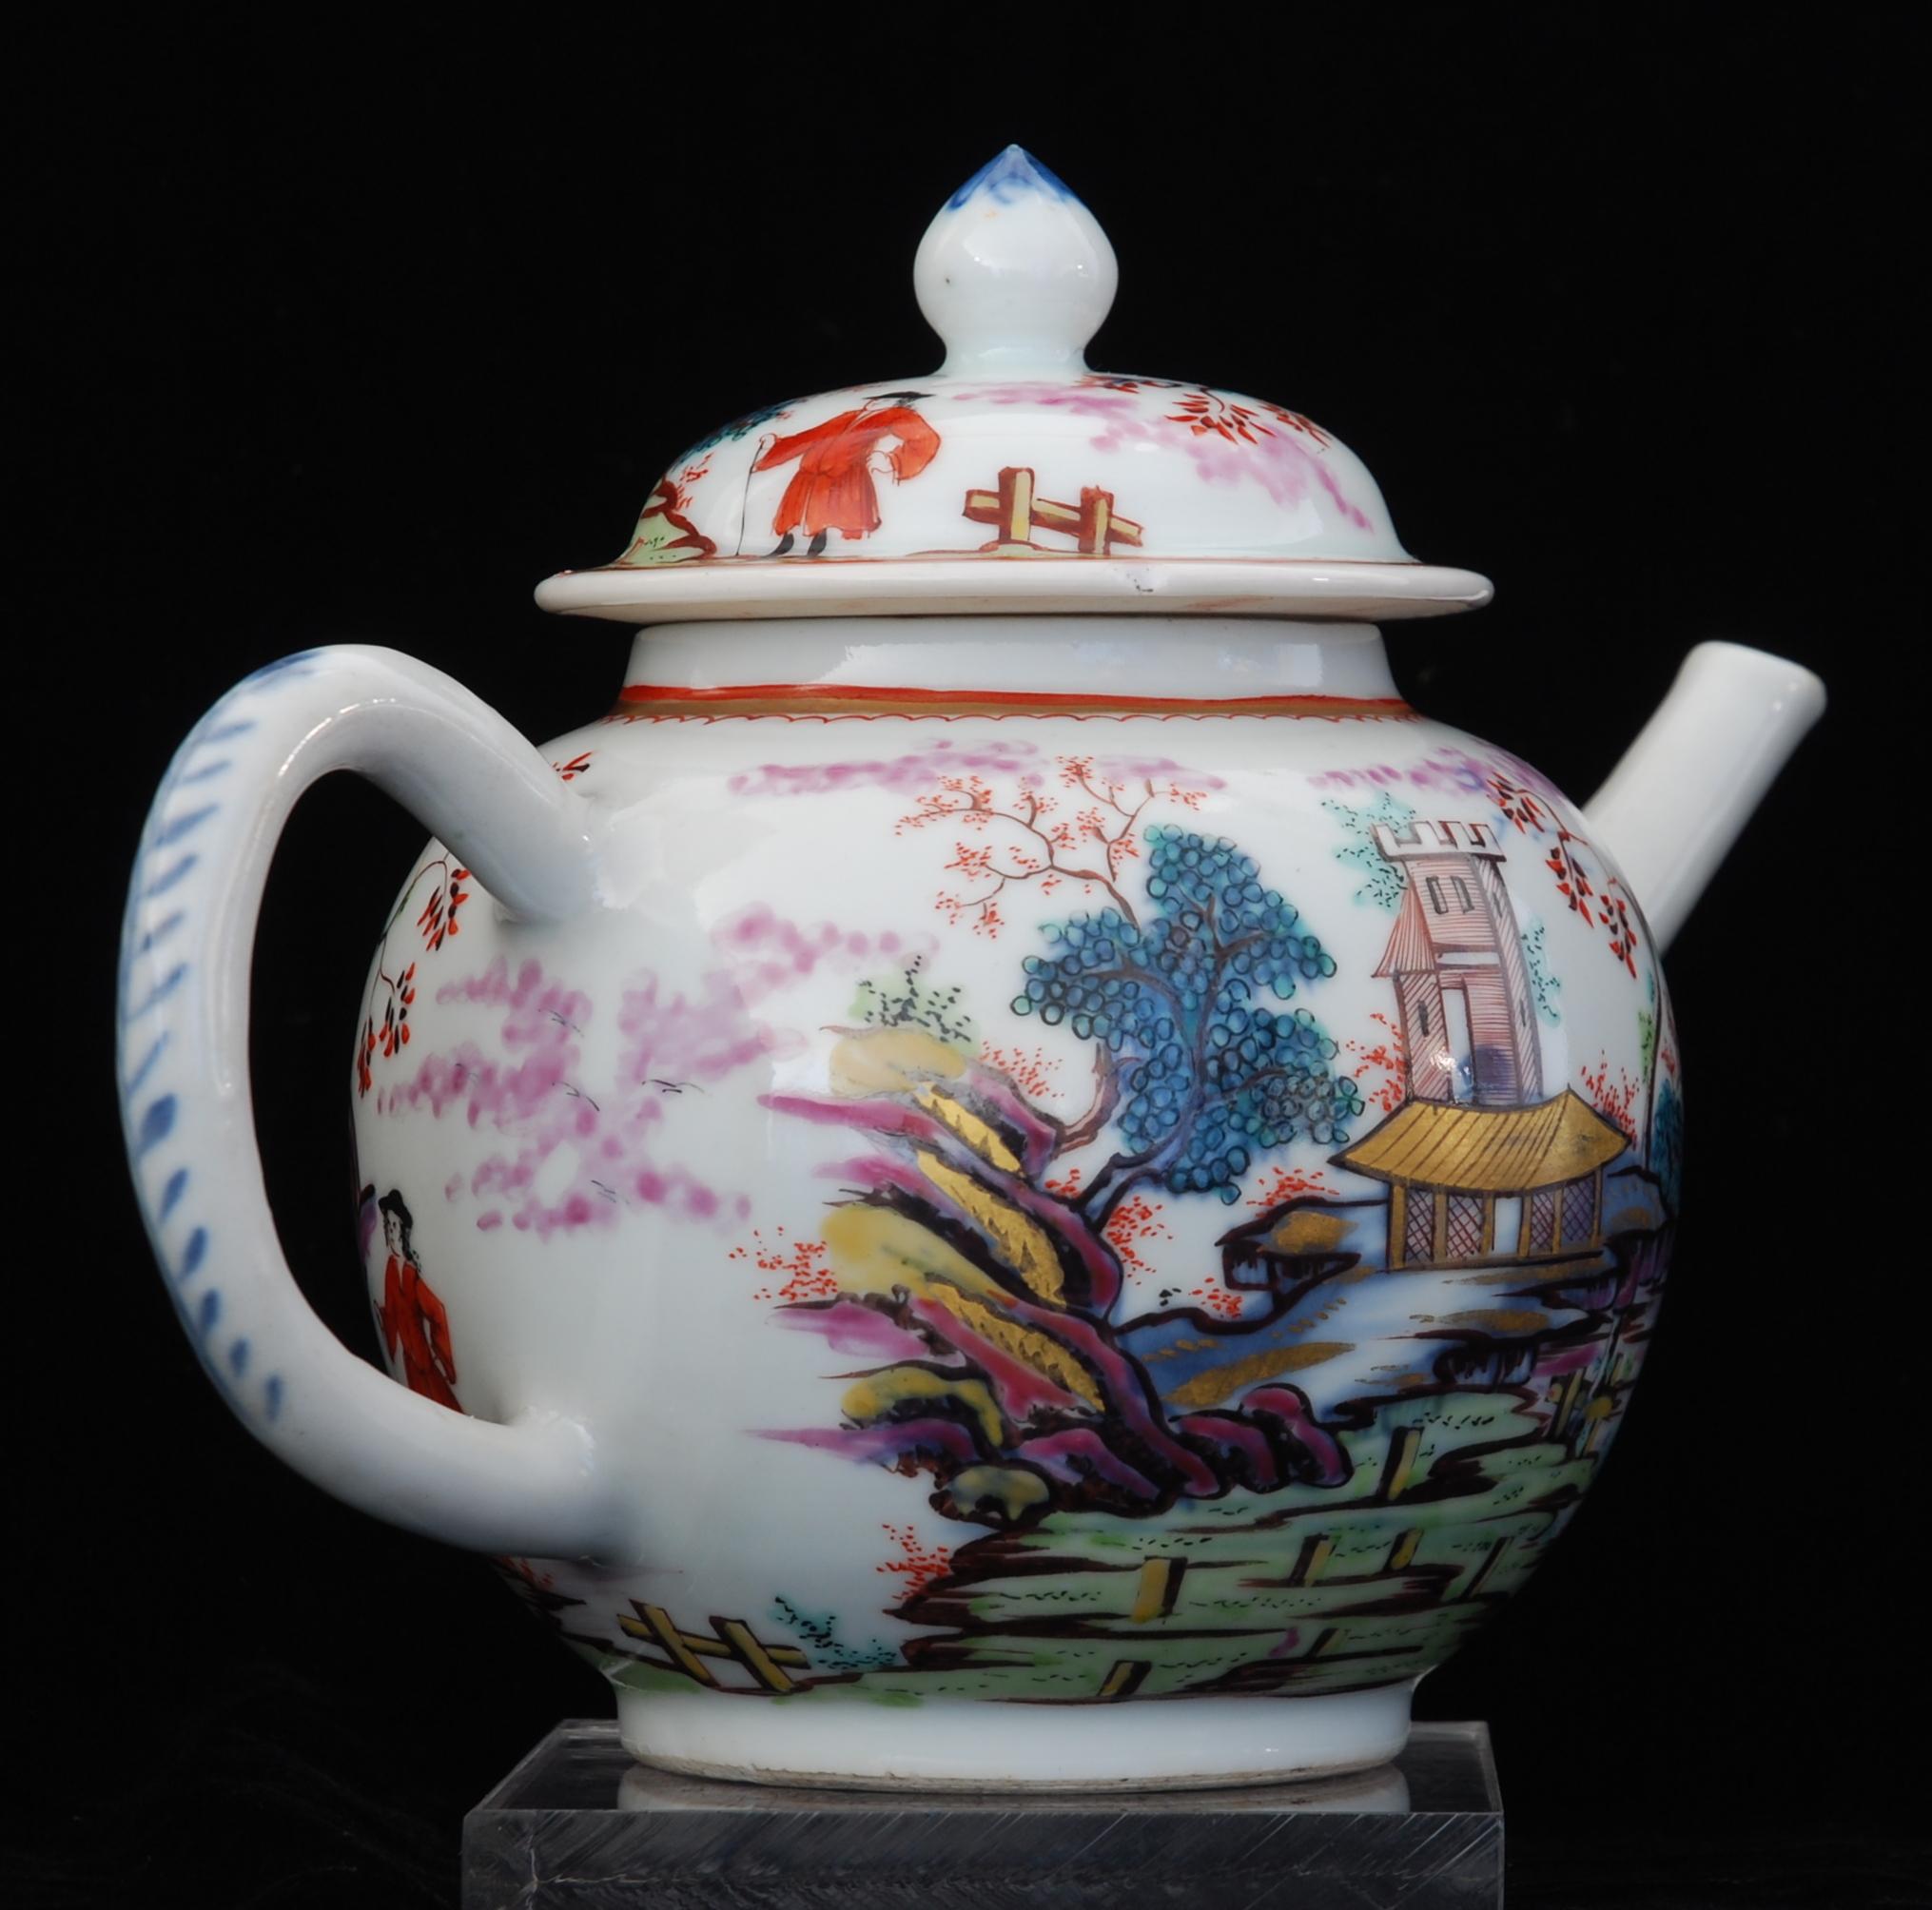 Porcelain Teapot, Red Coat Pattern, China, circa 1740, Decorated in London by Giles For Sale